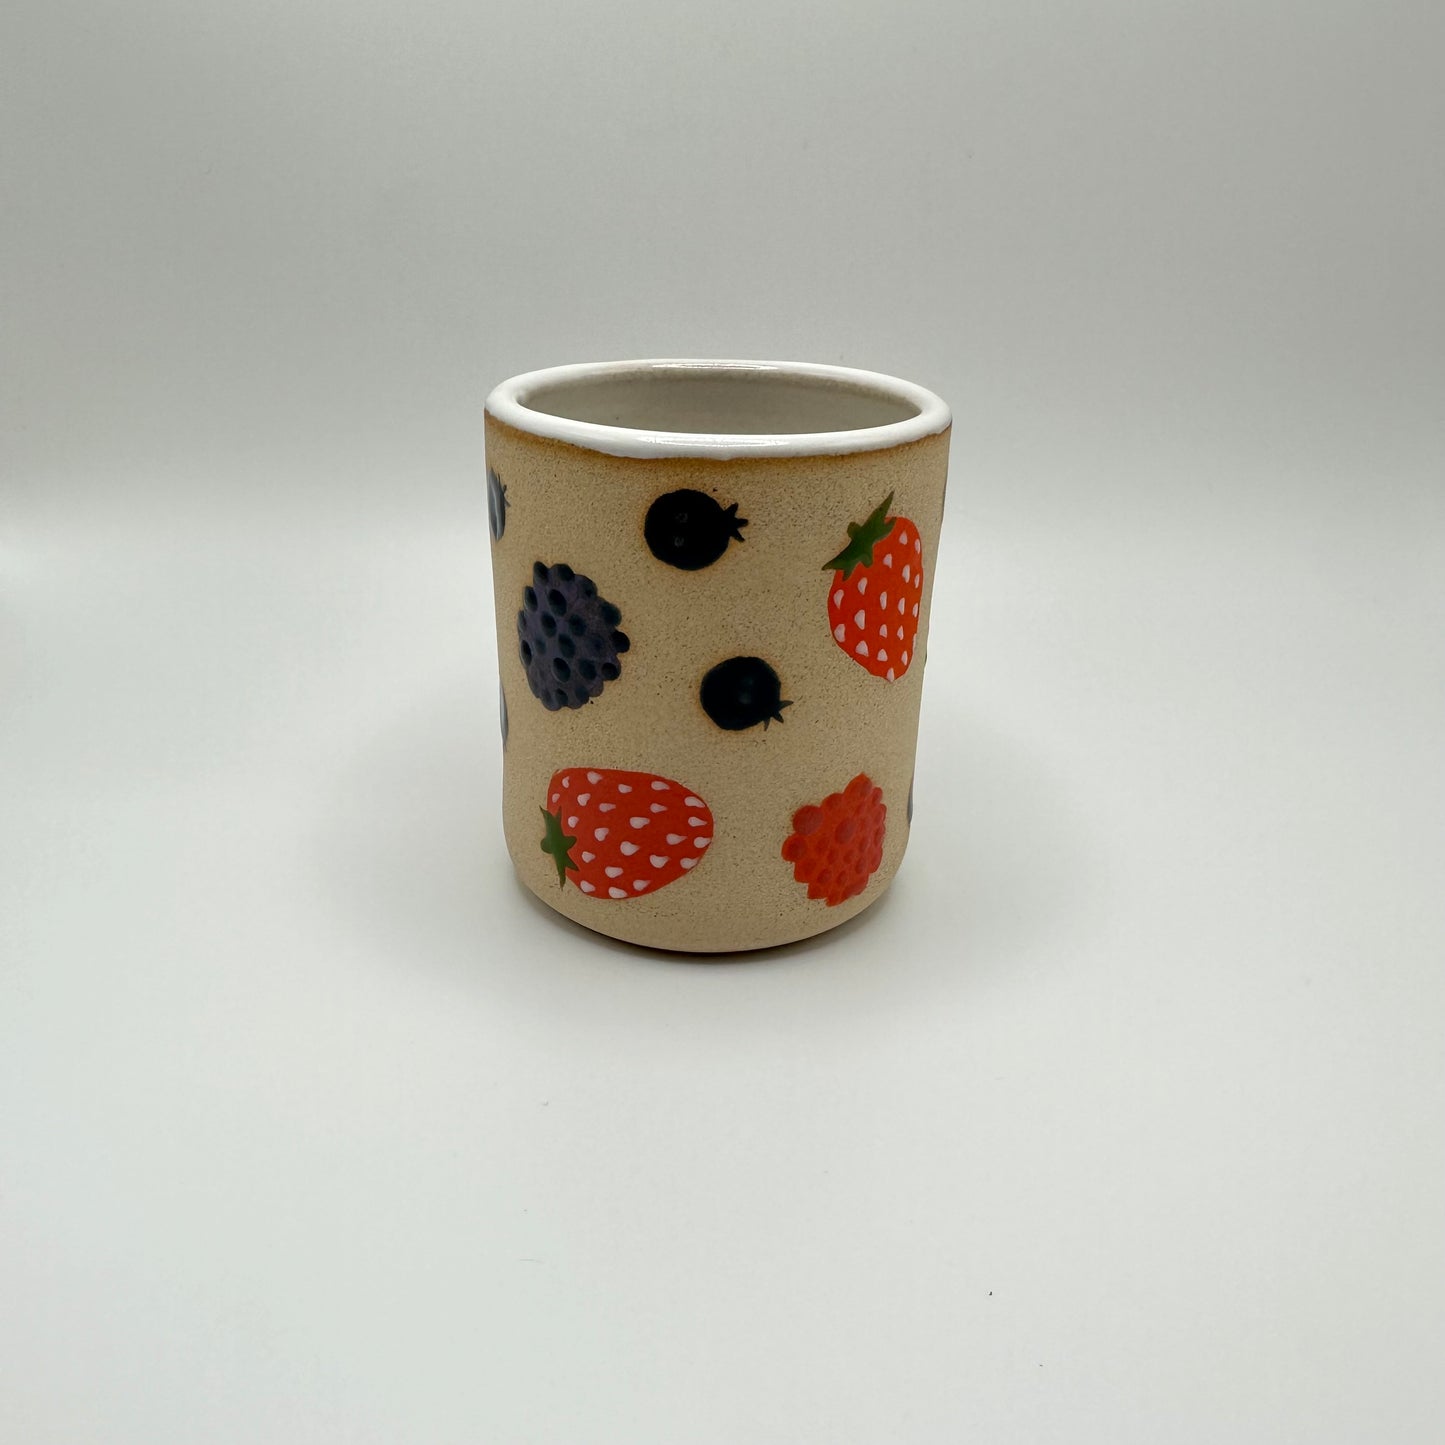 Ceramic tumbler adorned with hand painted mixed berries.